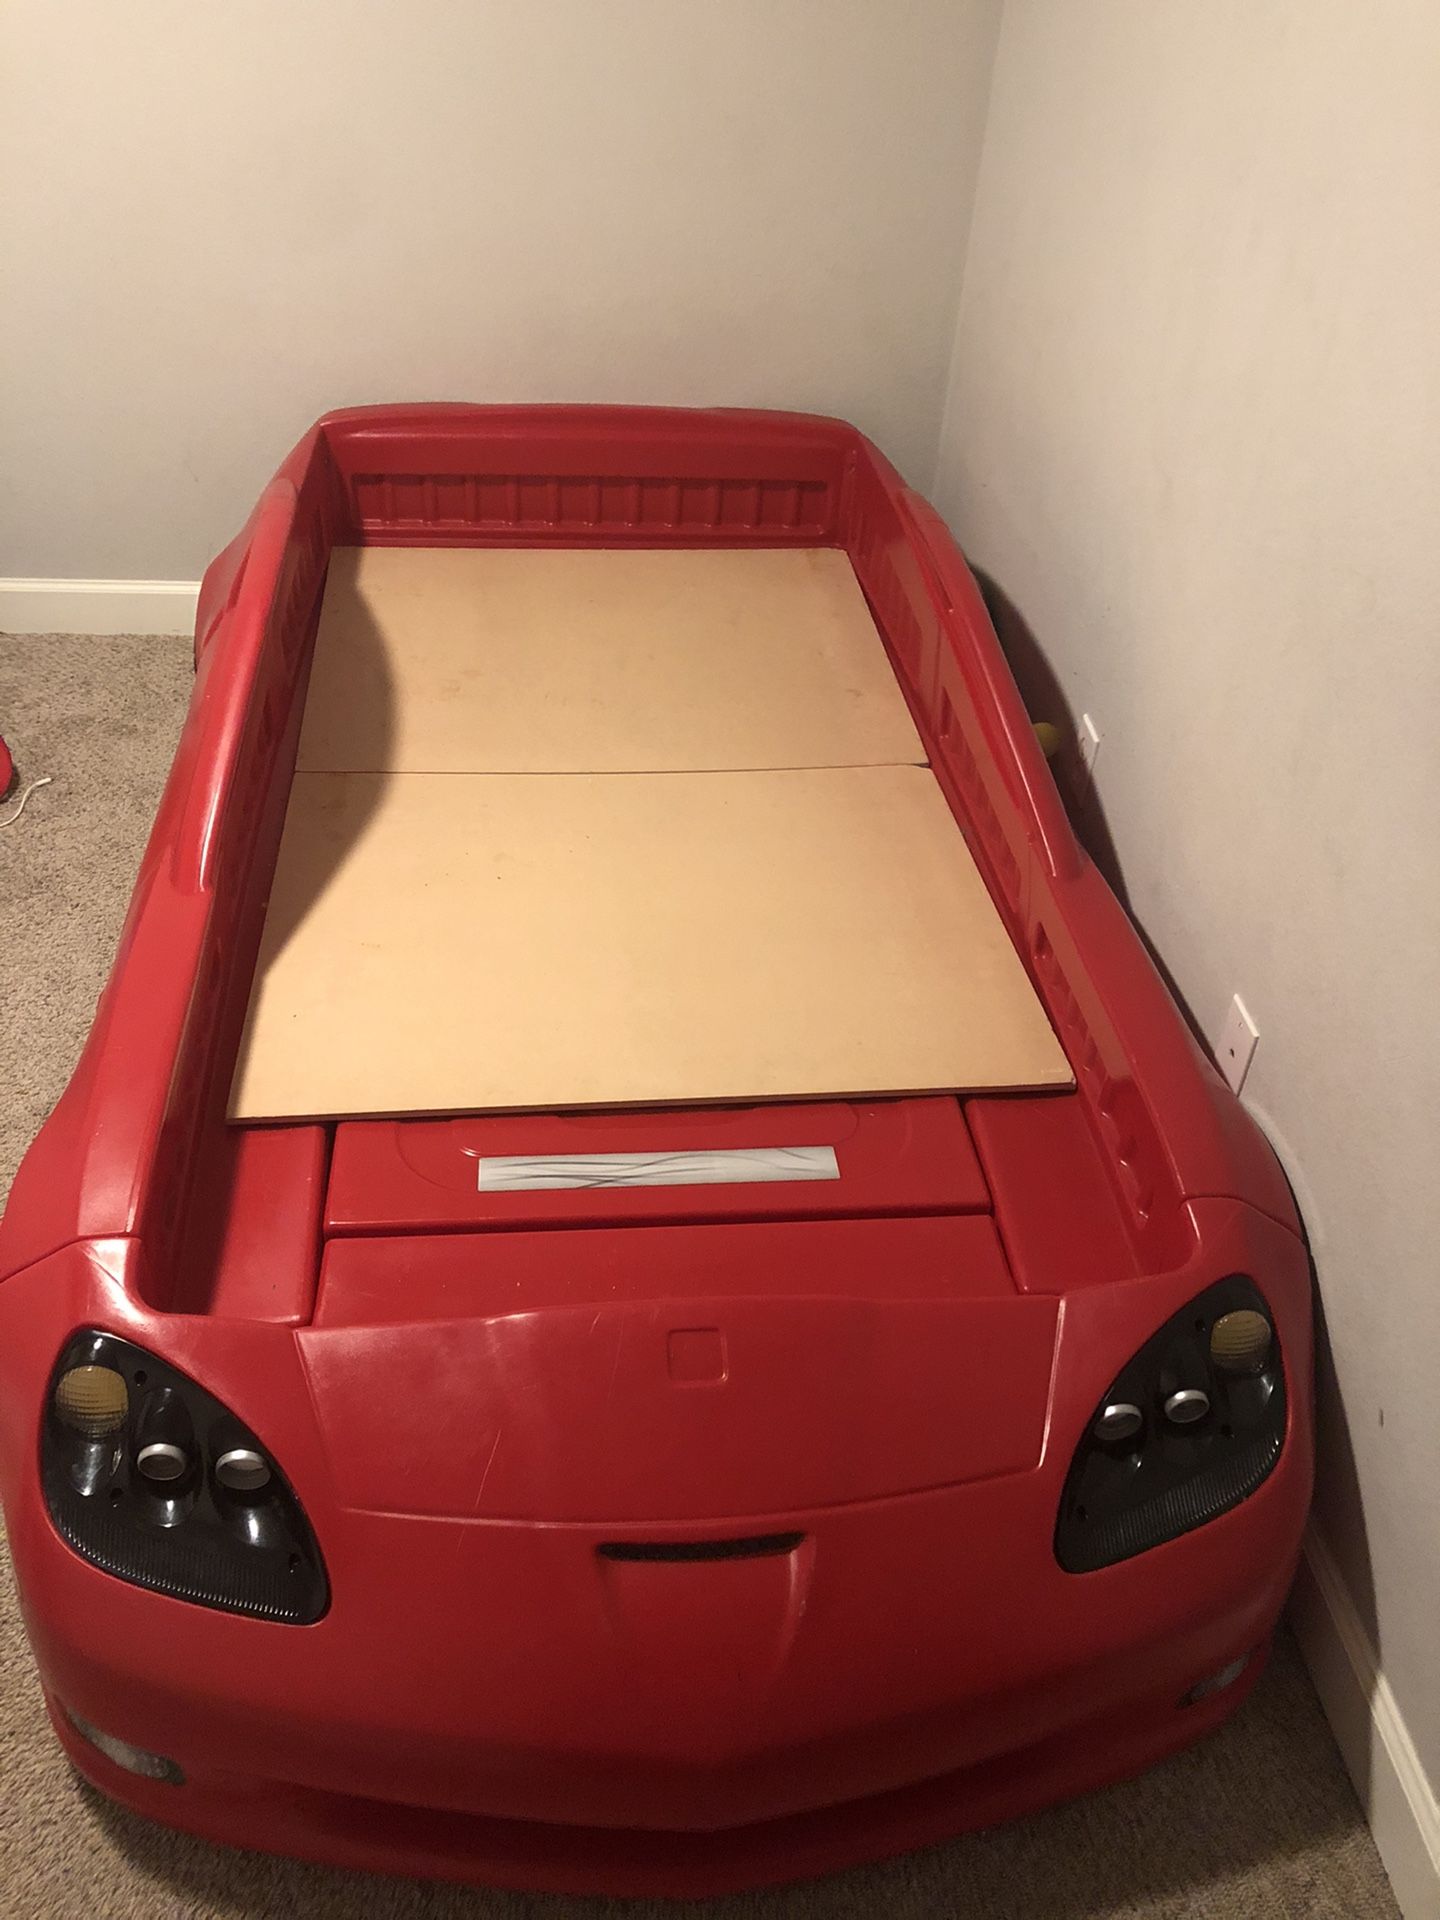 Toddlers Car Bed